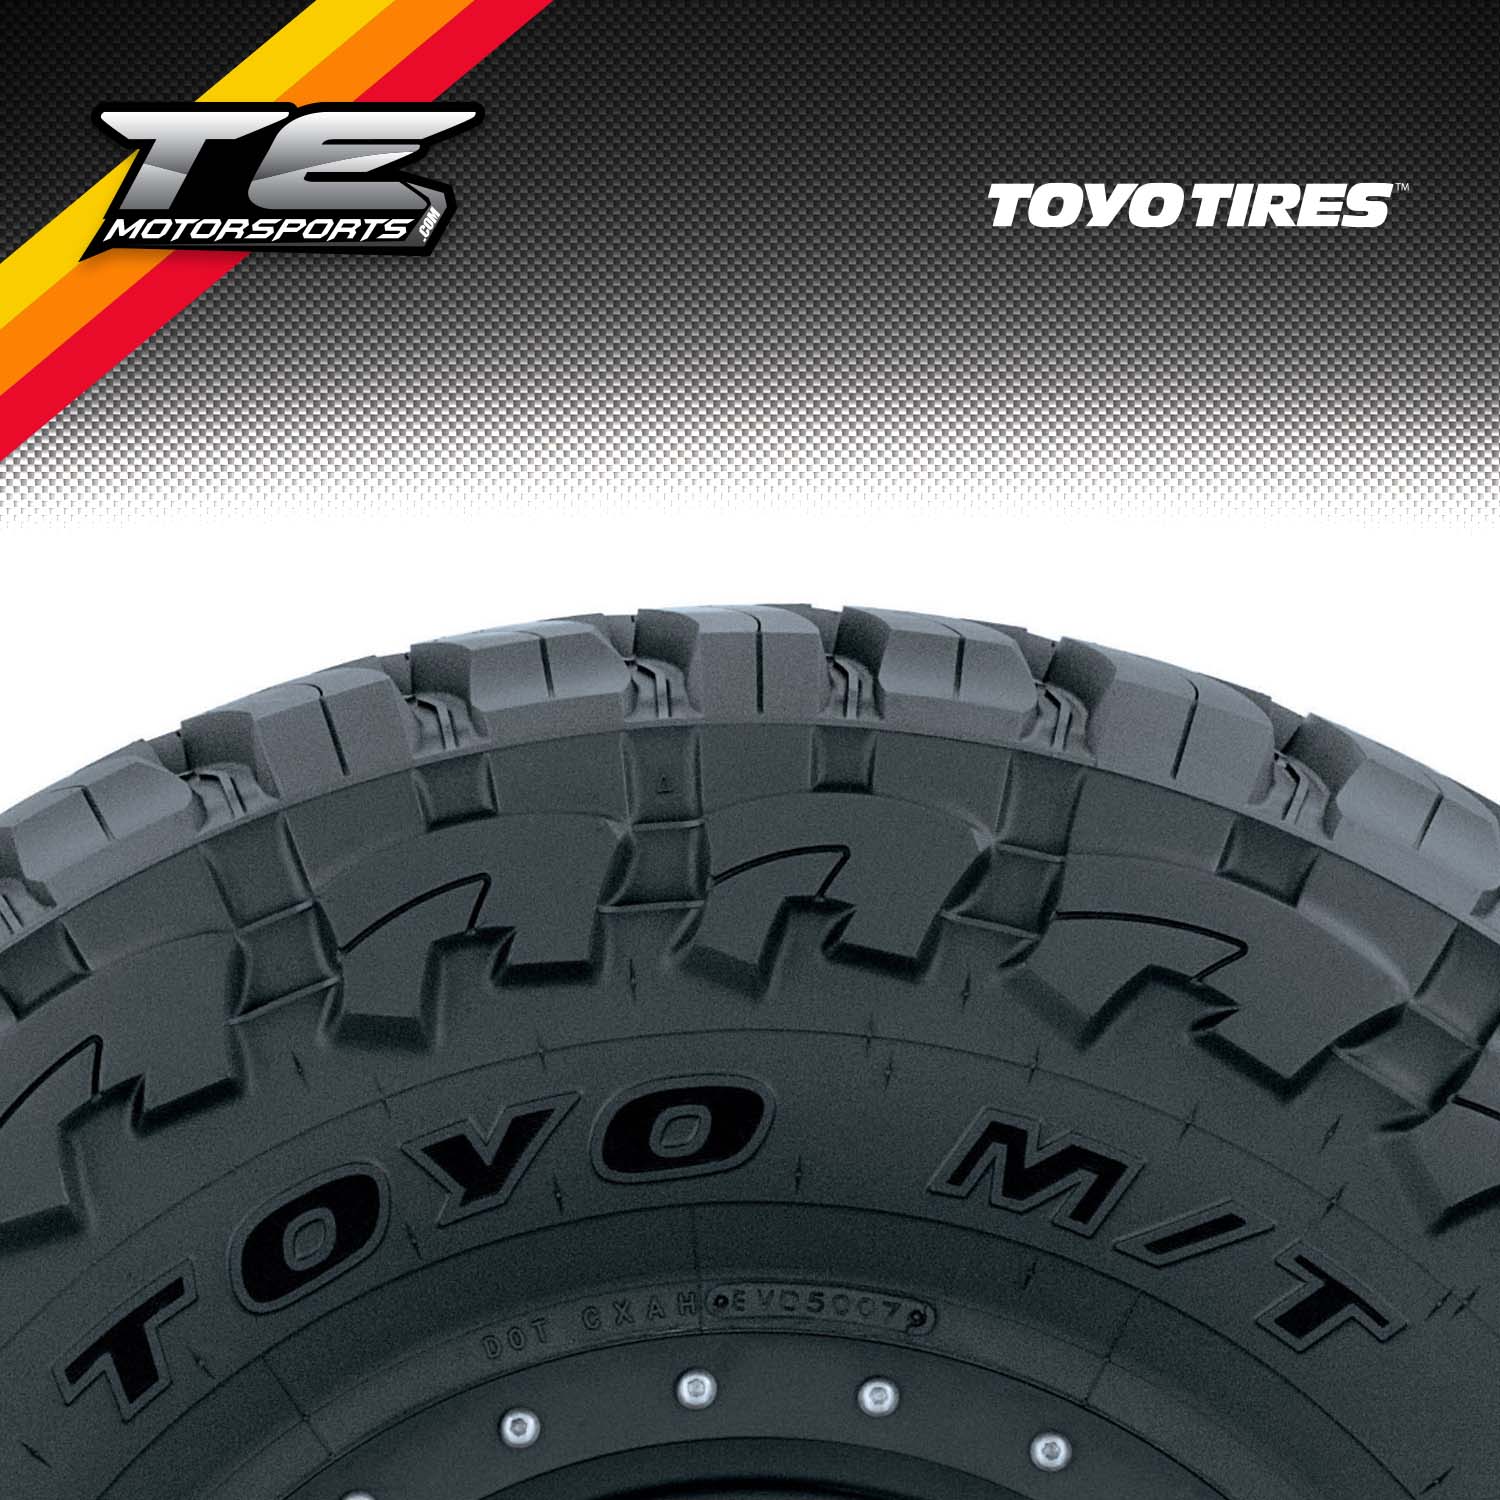 Toyo Tires LT285x70R17 Tire, Open Country M/T - 361100